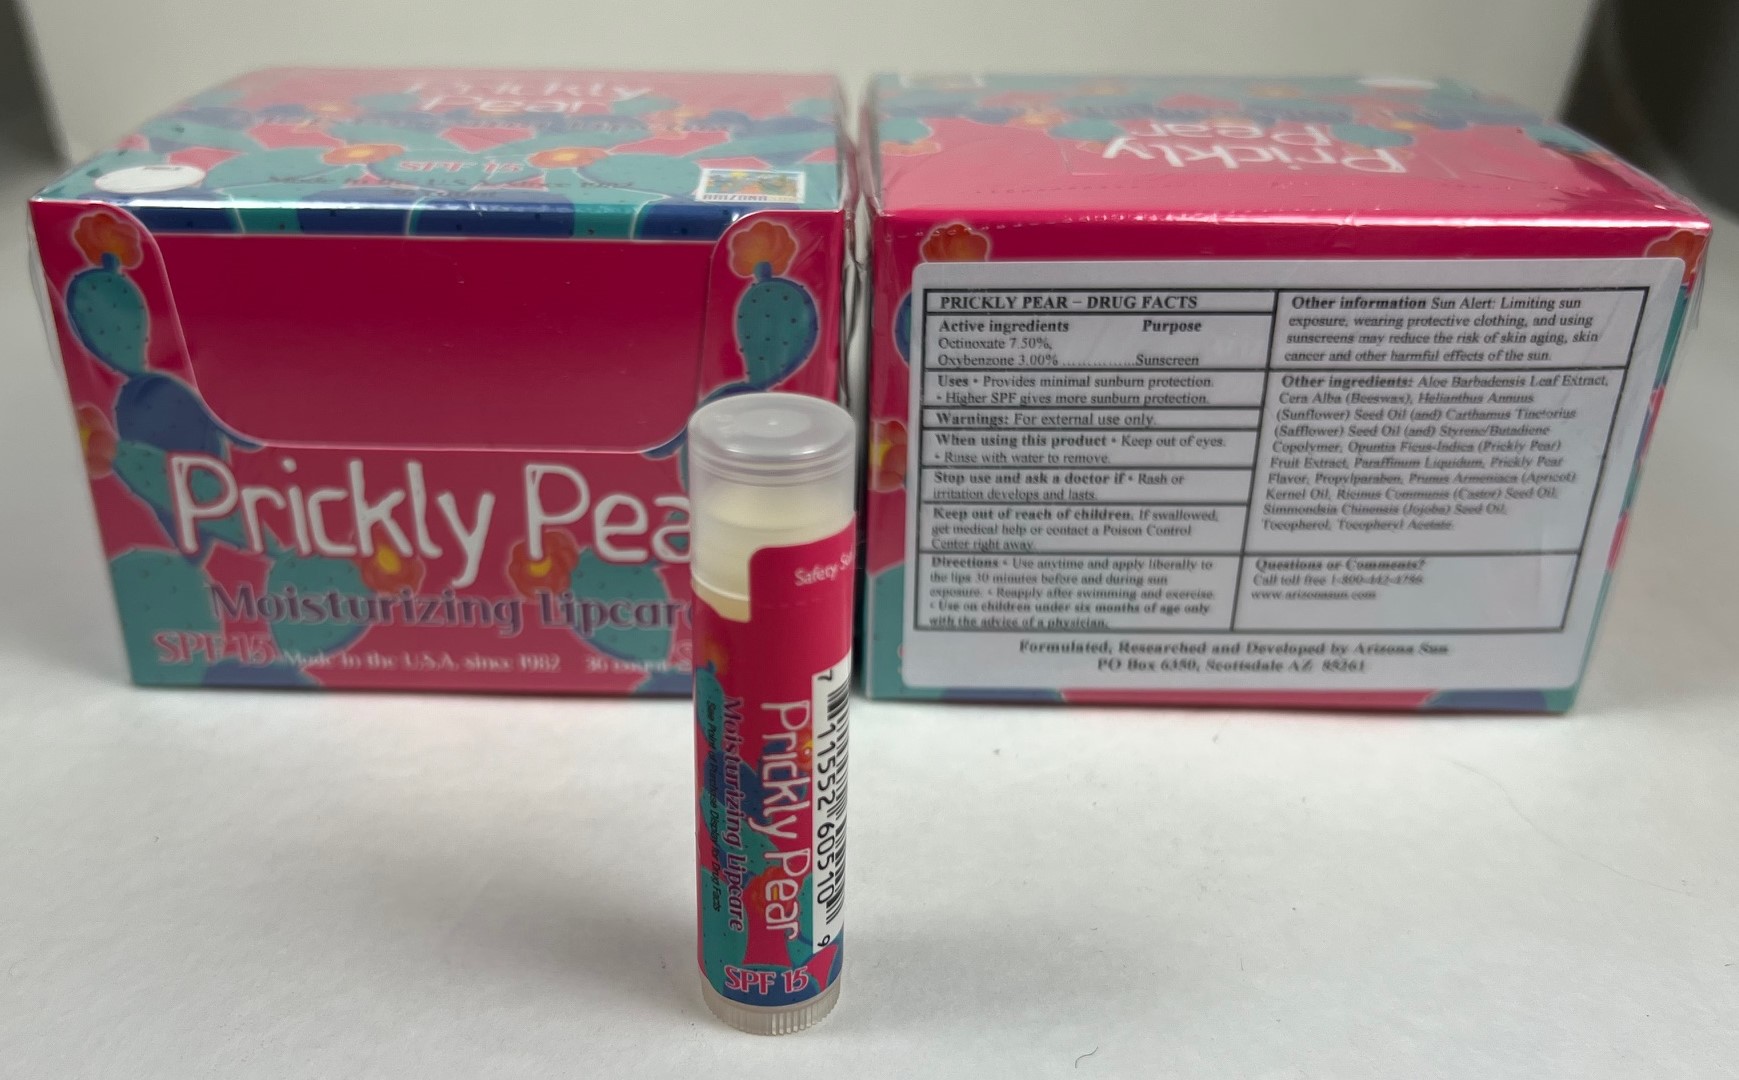 pricklypearbox